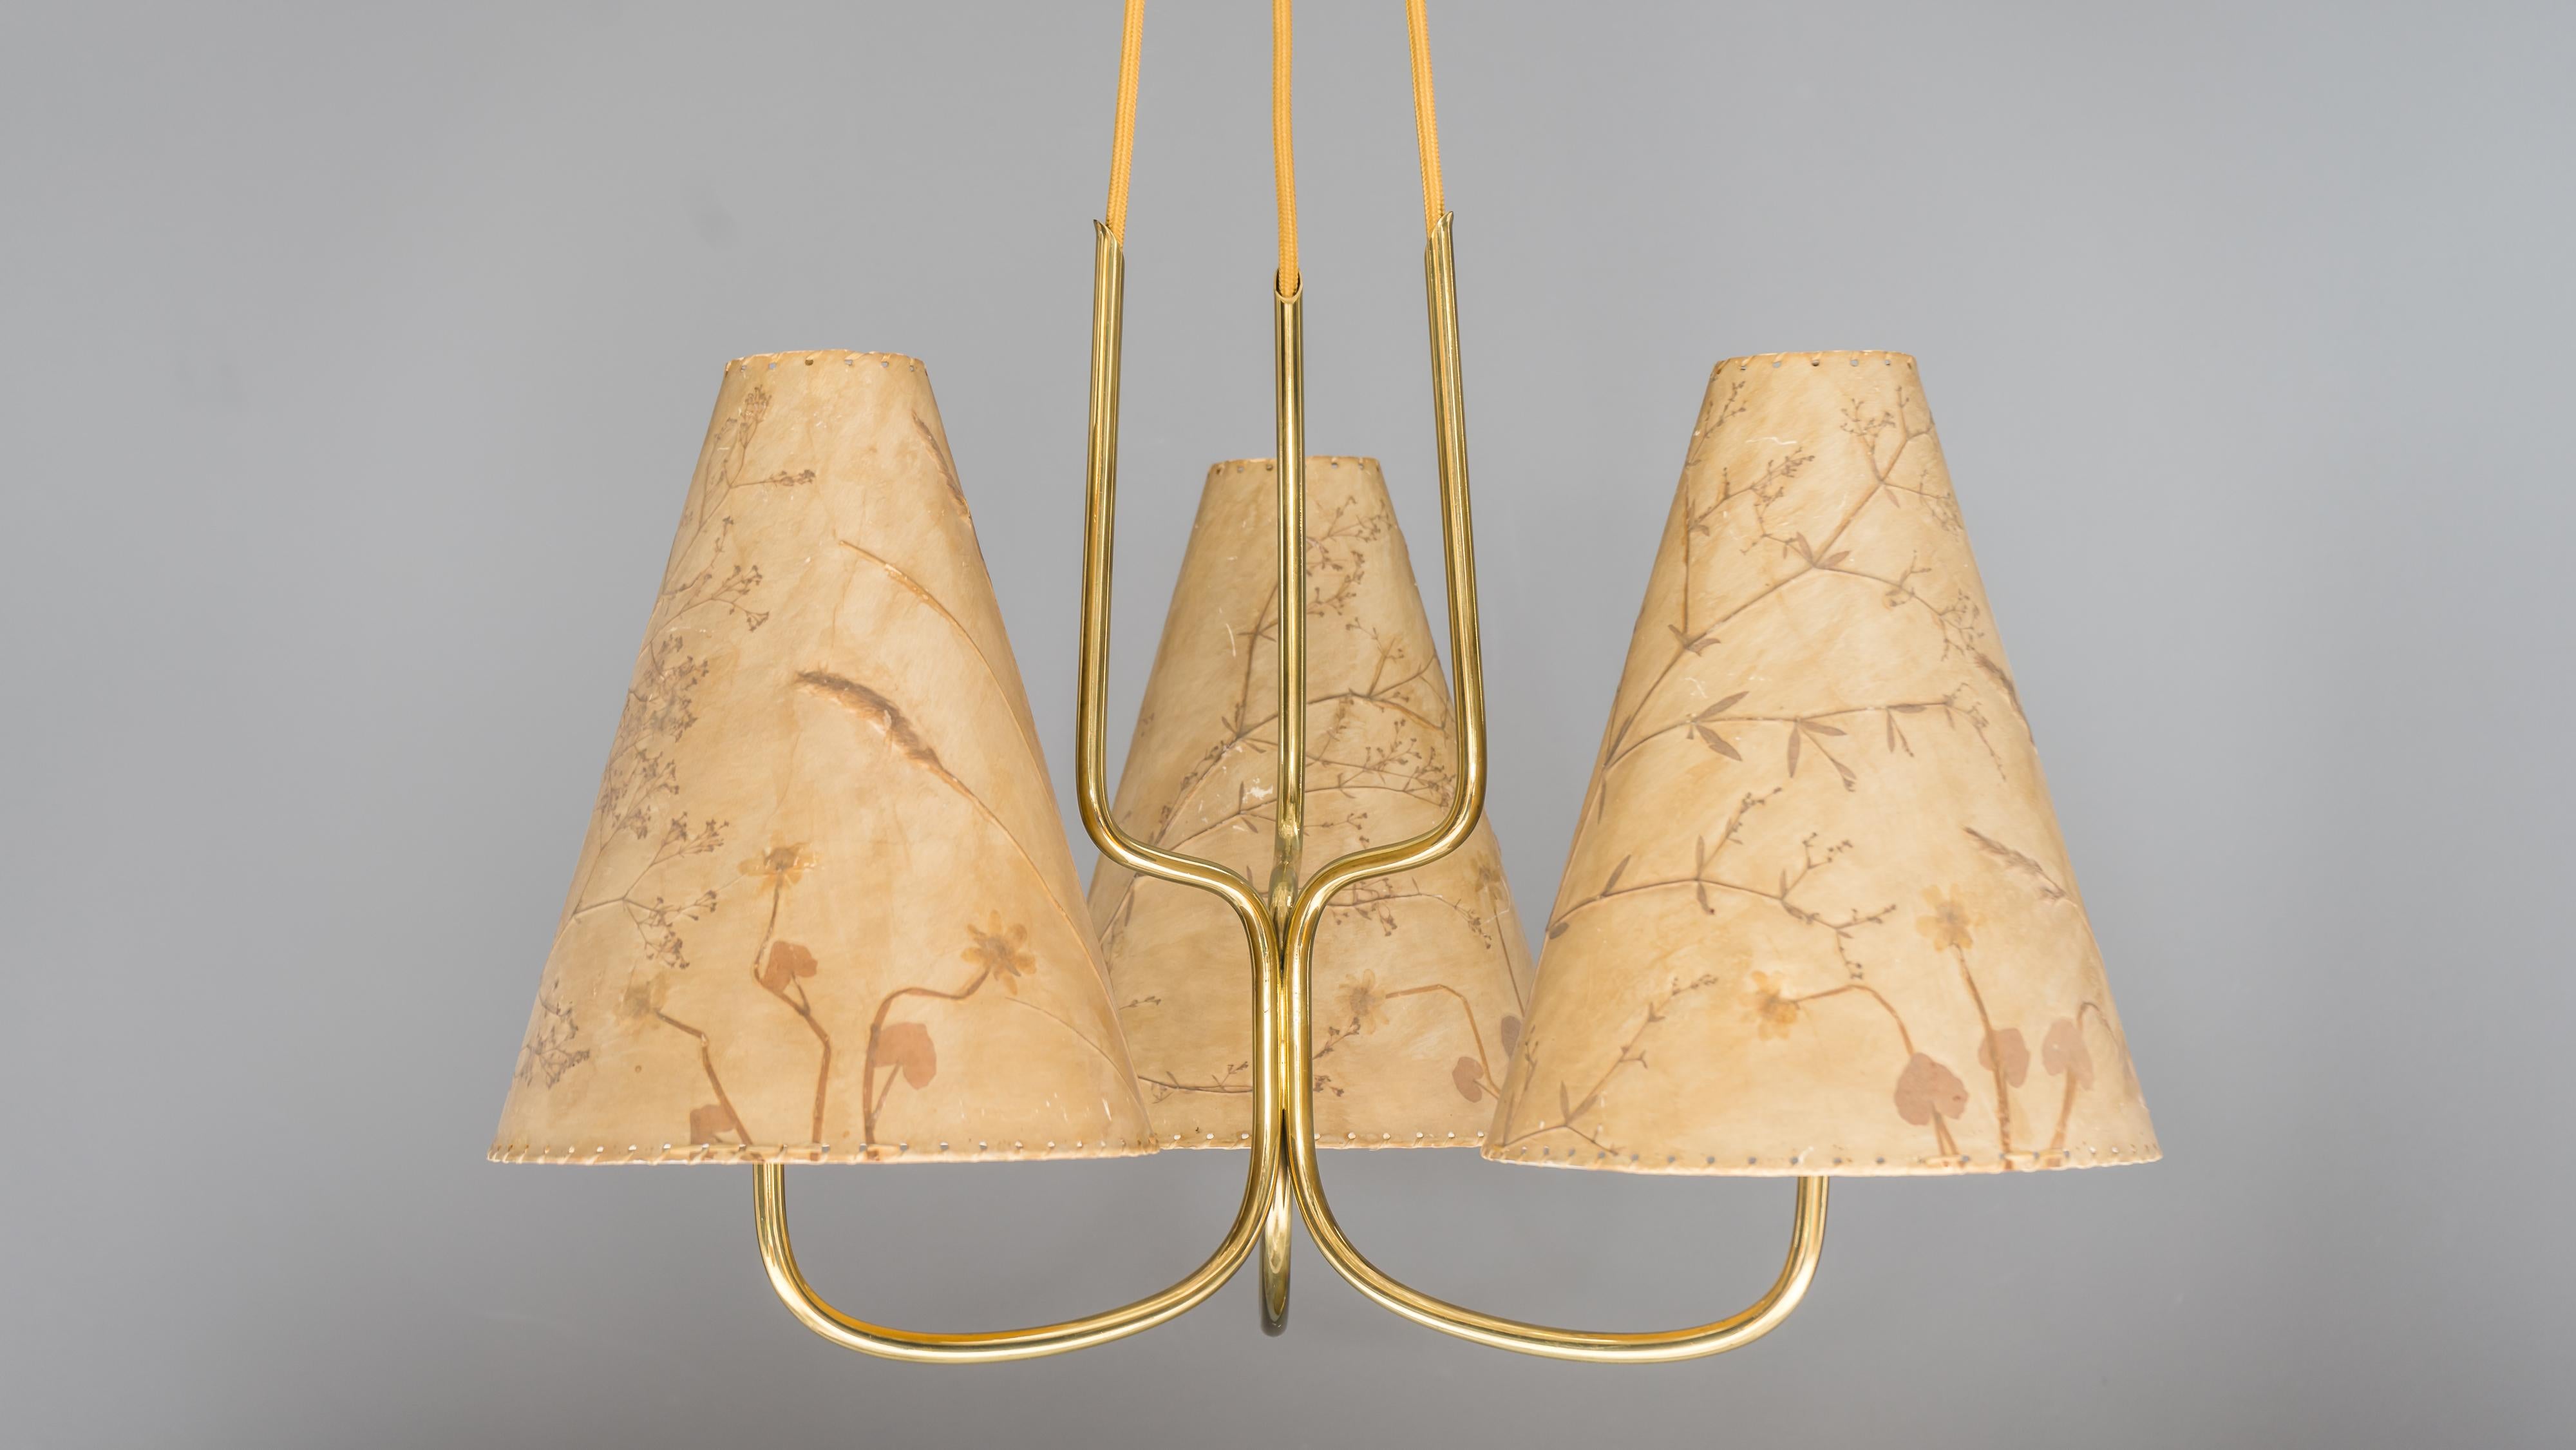 Kalmar chandelier, circa 1950s with original shades.
The shades are not in a excellent condition, but they are original. ( signs of use on the shades )
The chandelier is original condition.
 